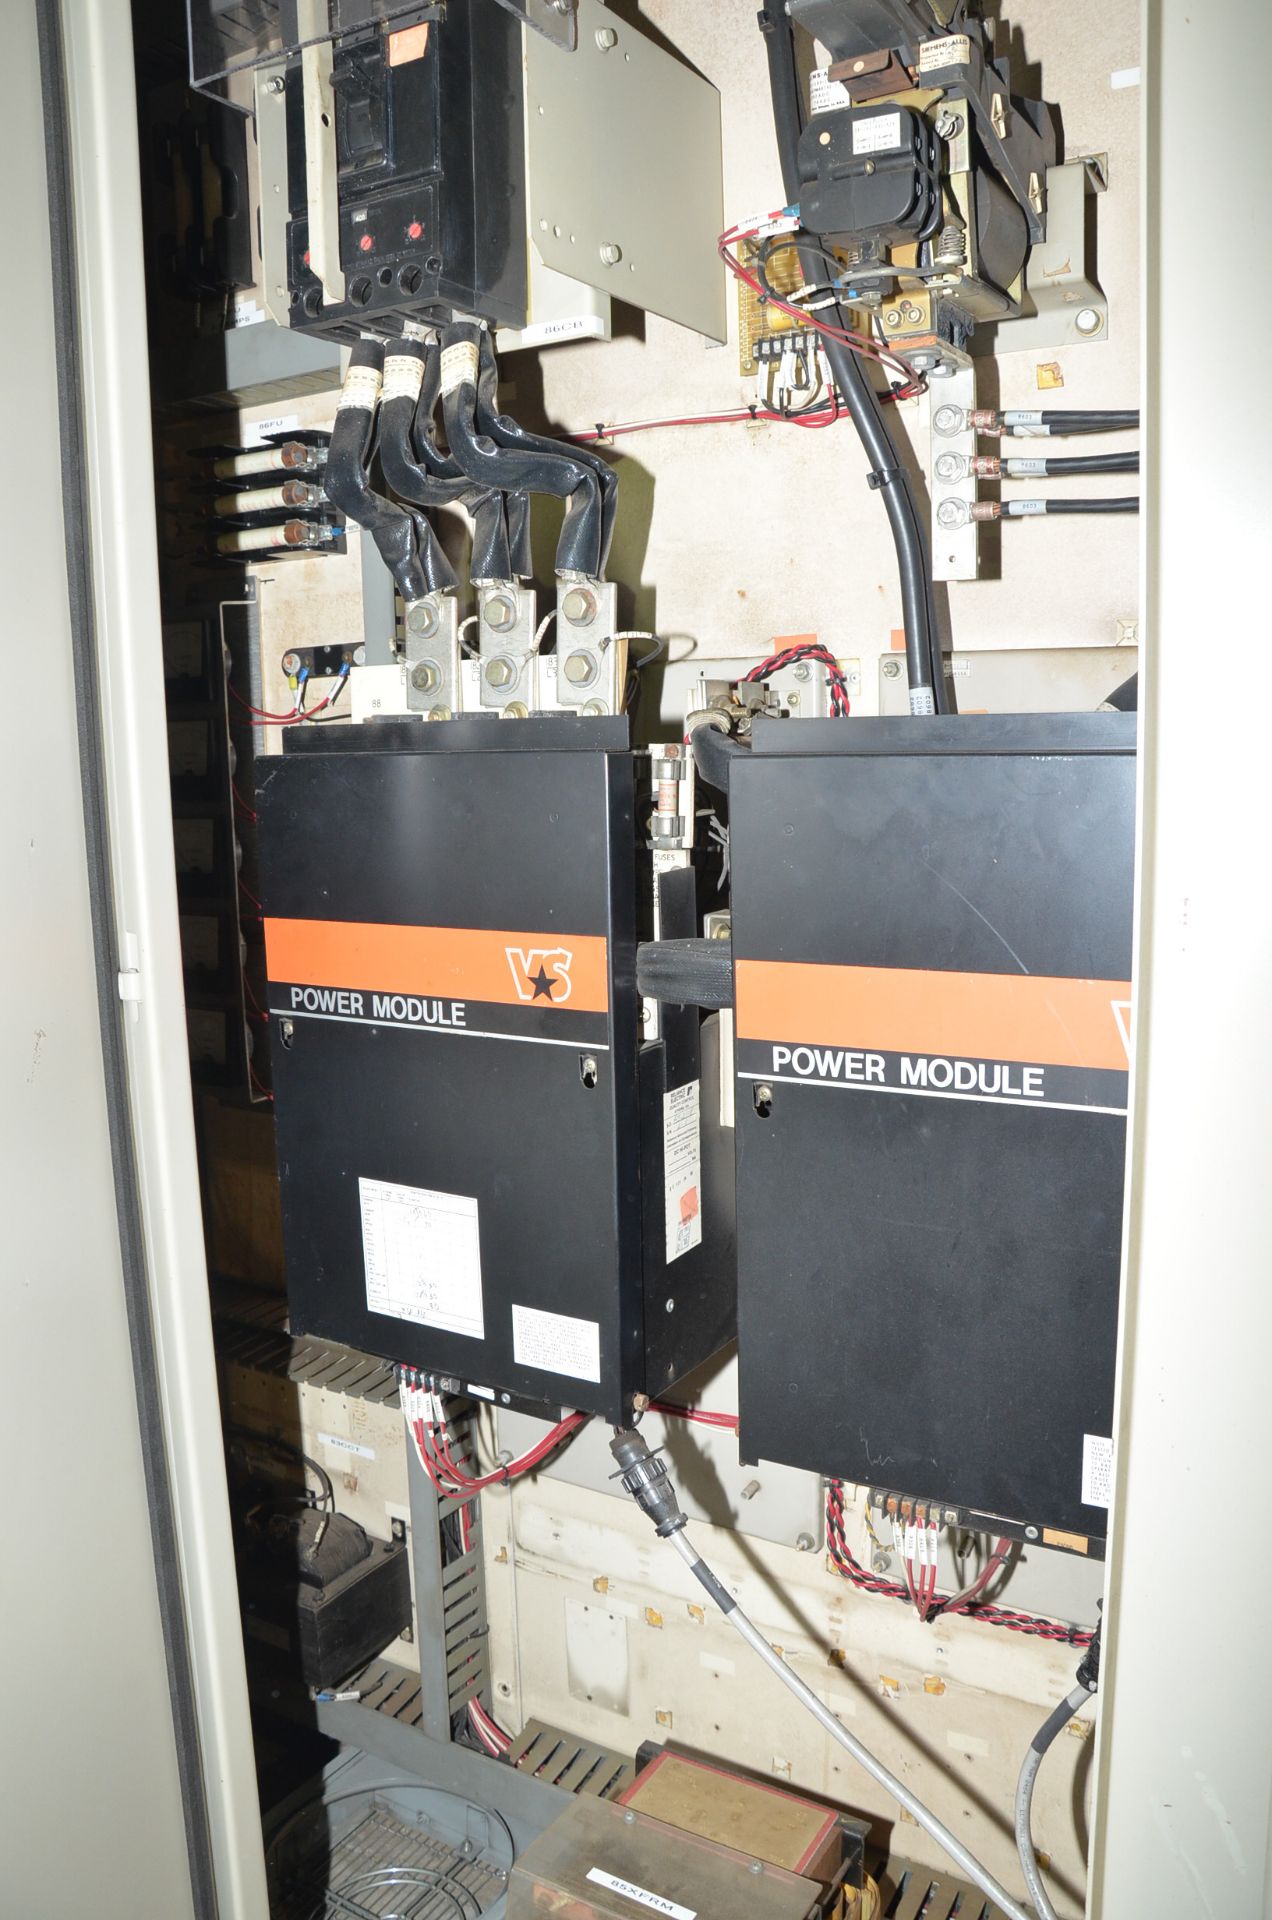 LOT/ PM5 DRIVE ROOM CABINETS CONSISTING OF 6-BANK CONTROL CABINETS WITH REMAINING COMPONENTS [ - Image 3 of 6